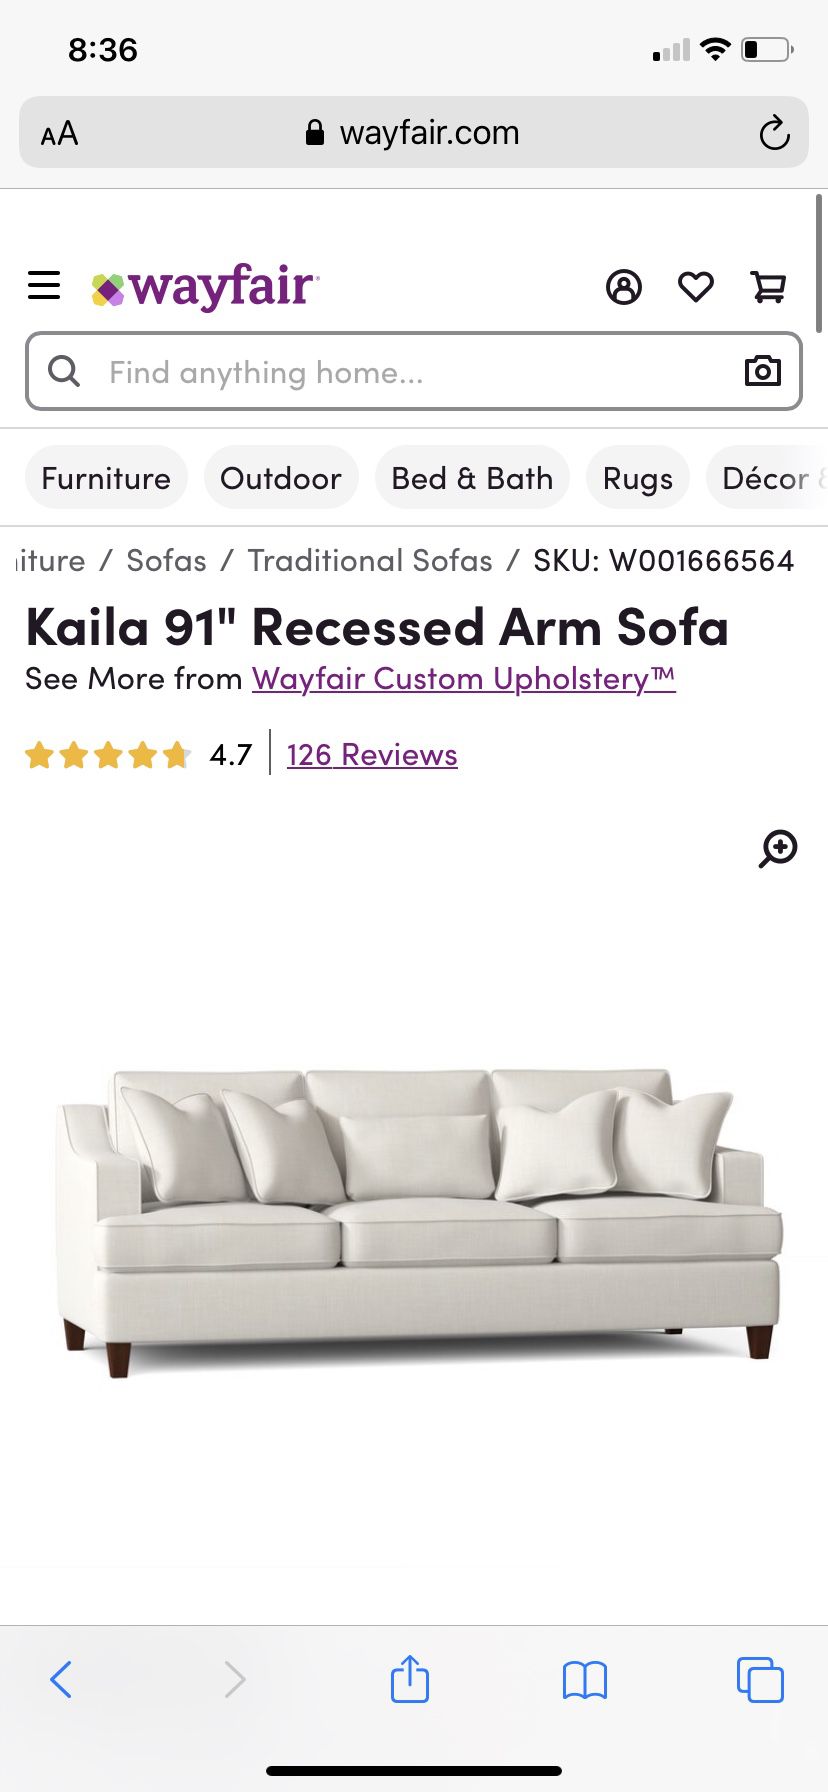 Brand new Kaila 91 sofa from Wayfair. Still in original packaging. Pick up or delivery for $50. Drop off only at the curb $25. Pick up also available